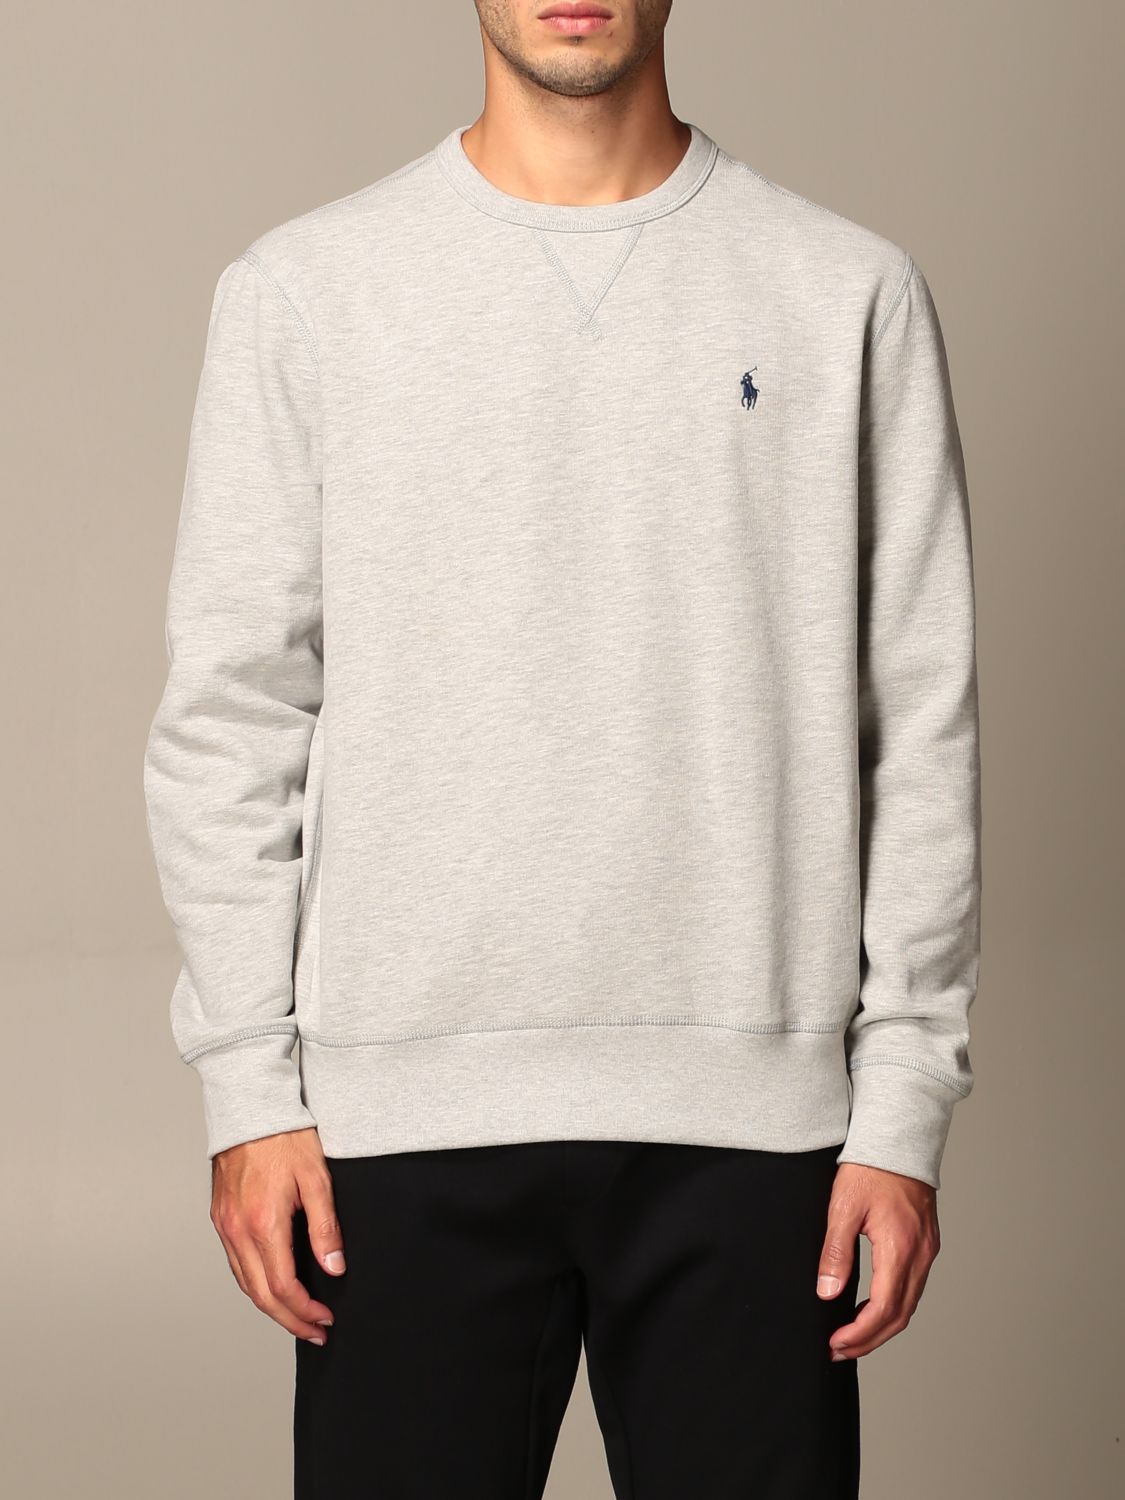 Polo Ralph Lauren Outlet: sweatshirt in washed cotton with logo - Grey | Polo  Ralph Lauren sweatshirt 710766772 online on 